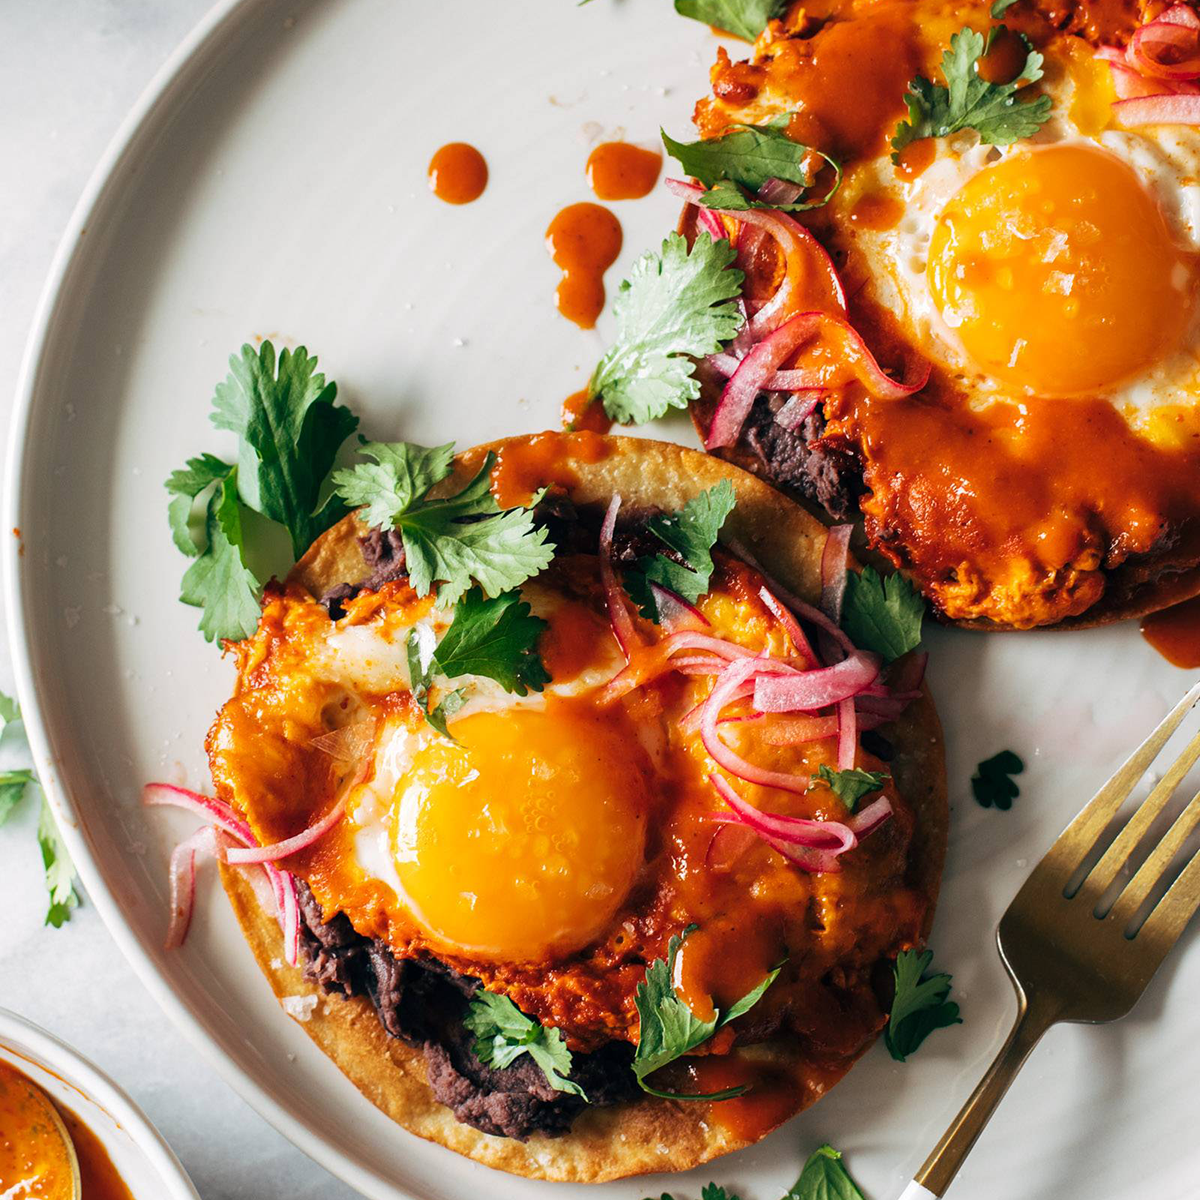 Tostadas on a plate with eggs, black beans, and cilantro.